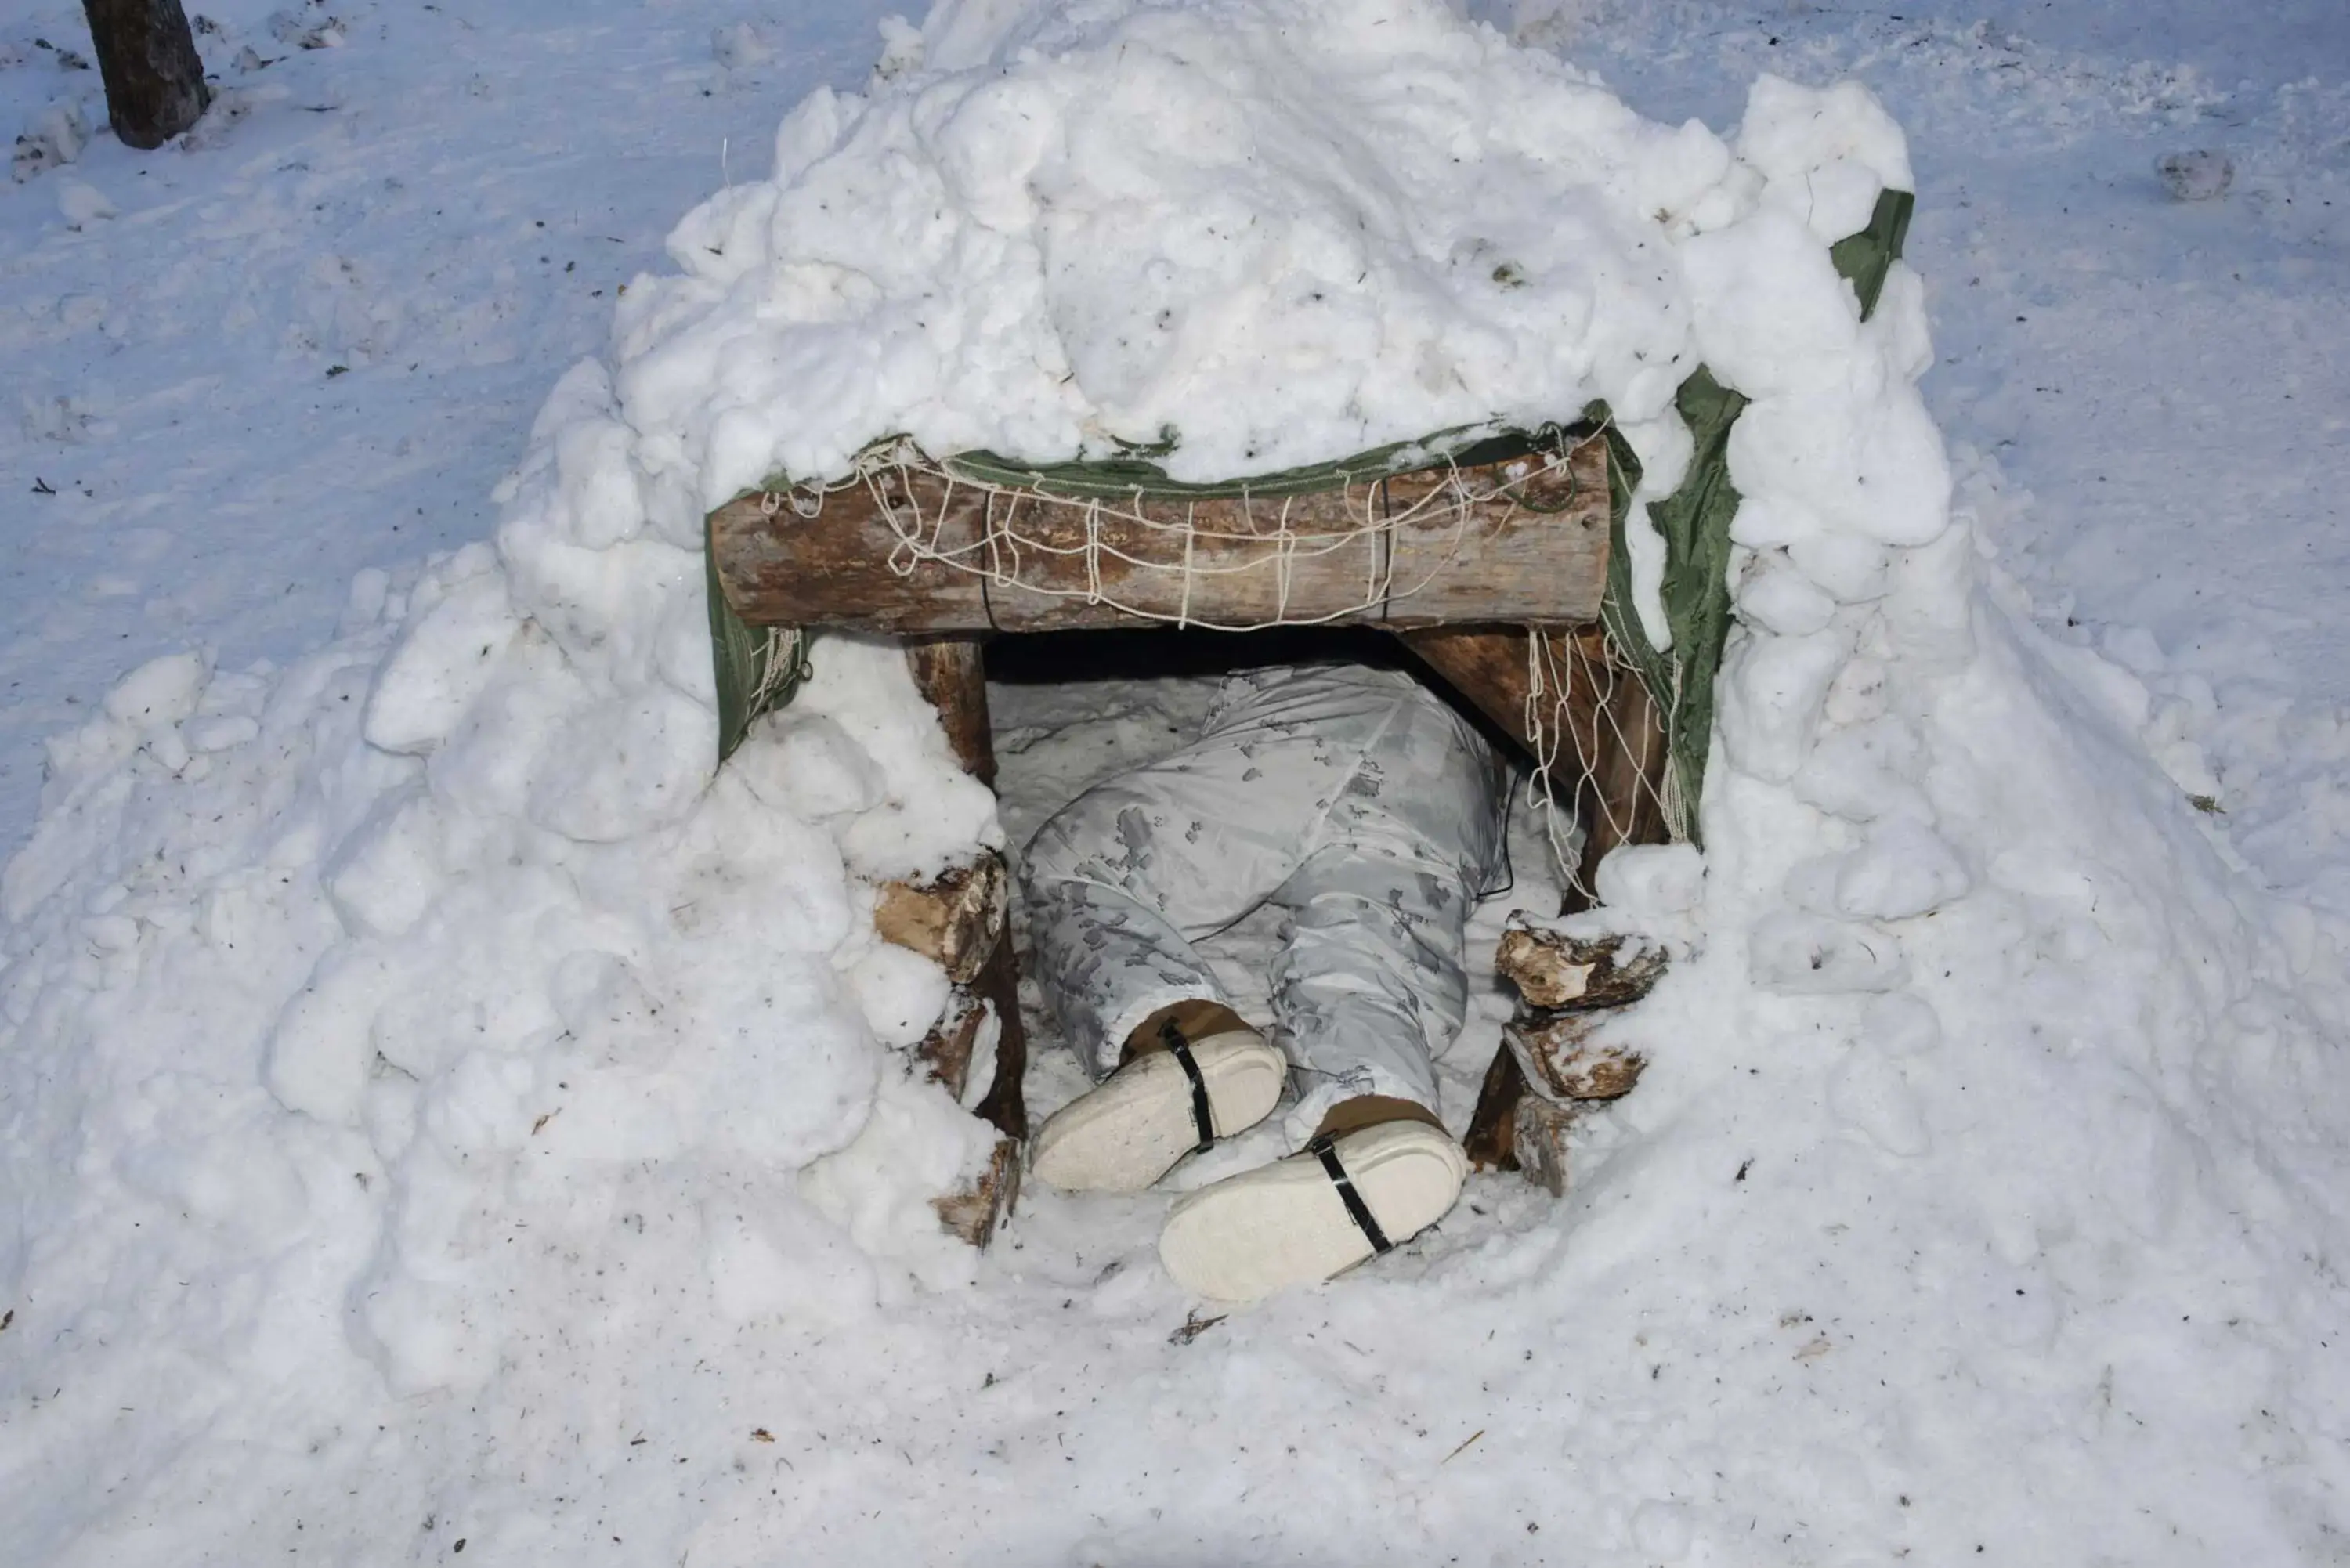 A soldier visible from the waist down is climbing into a shelter that looks like the entrance to a small animal’s burrow. The entrance is framed by wooden trunks and the rest of the shelter is covered in snow.